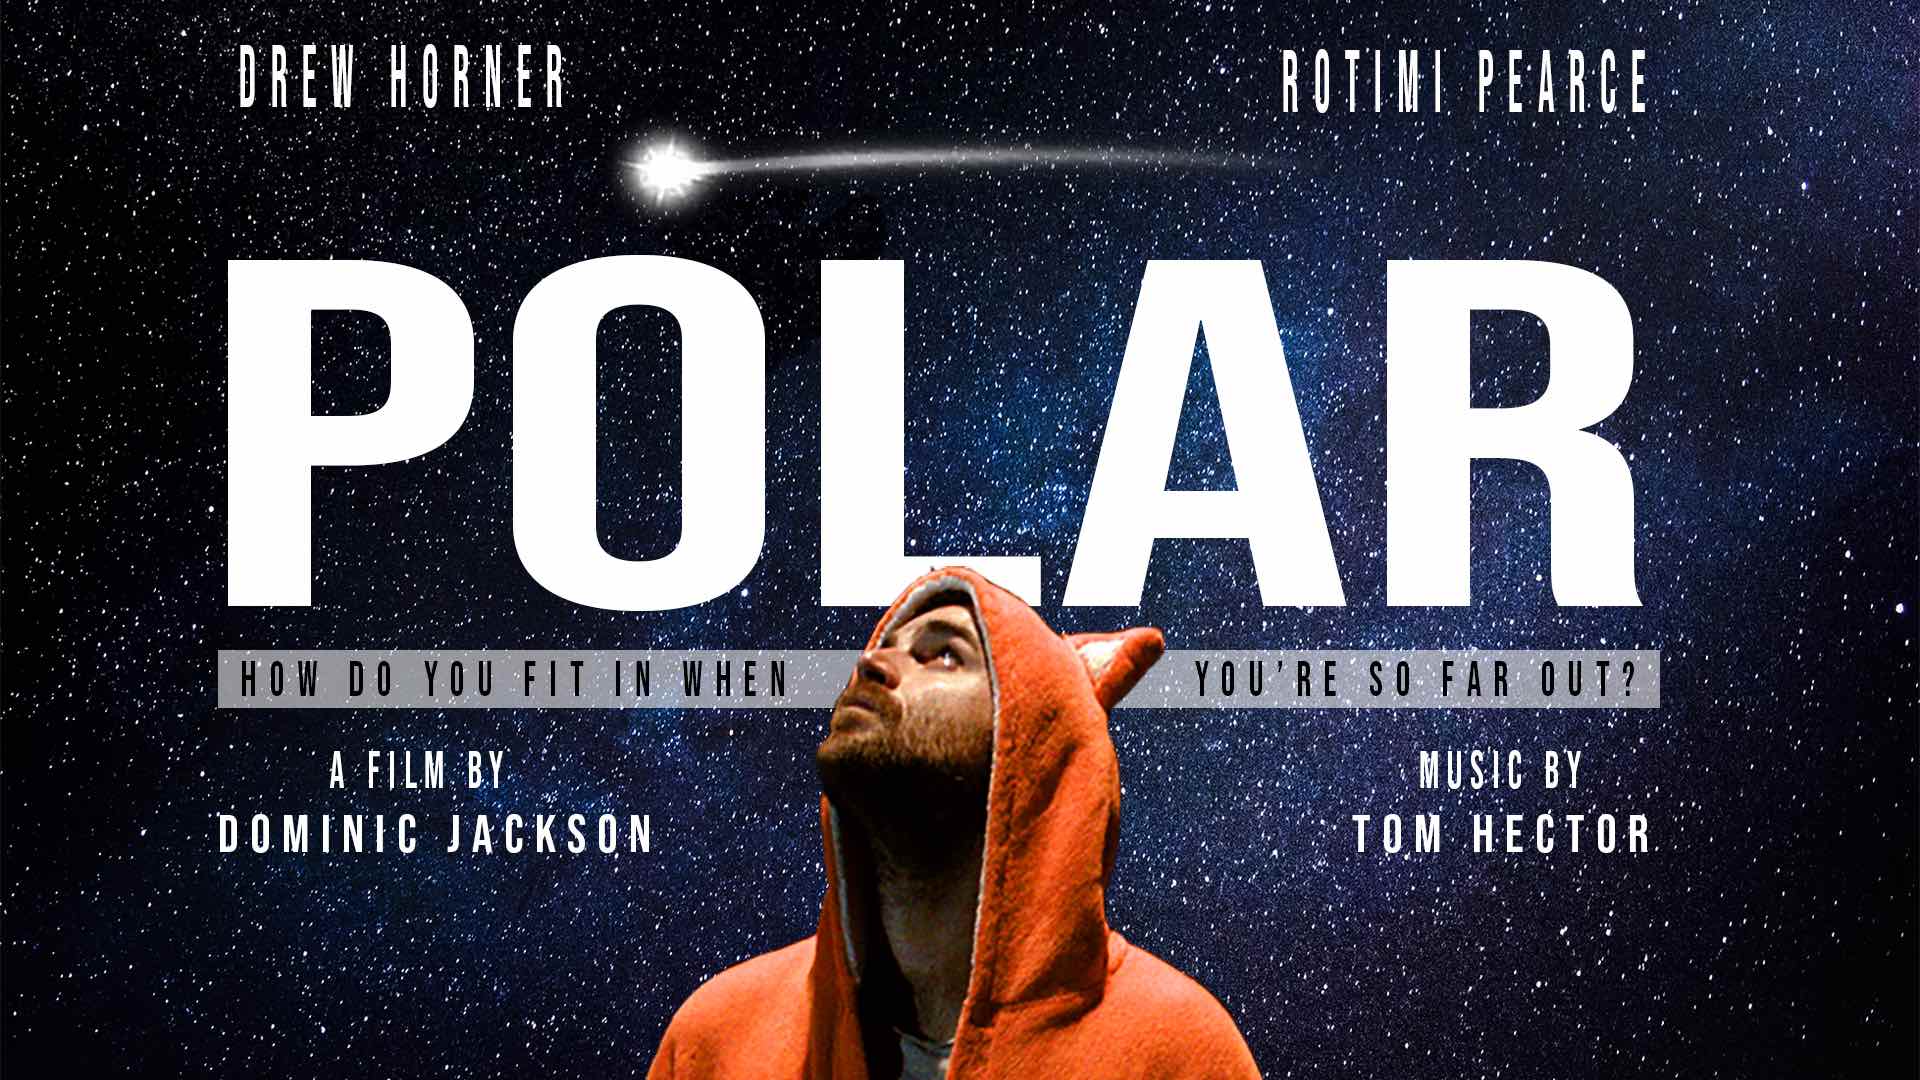 Dominic Jackson's 'Polar' takes on mental illness, showing how life with these issues can feel impossible without some kind of chemical help.